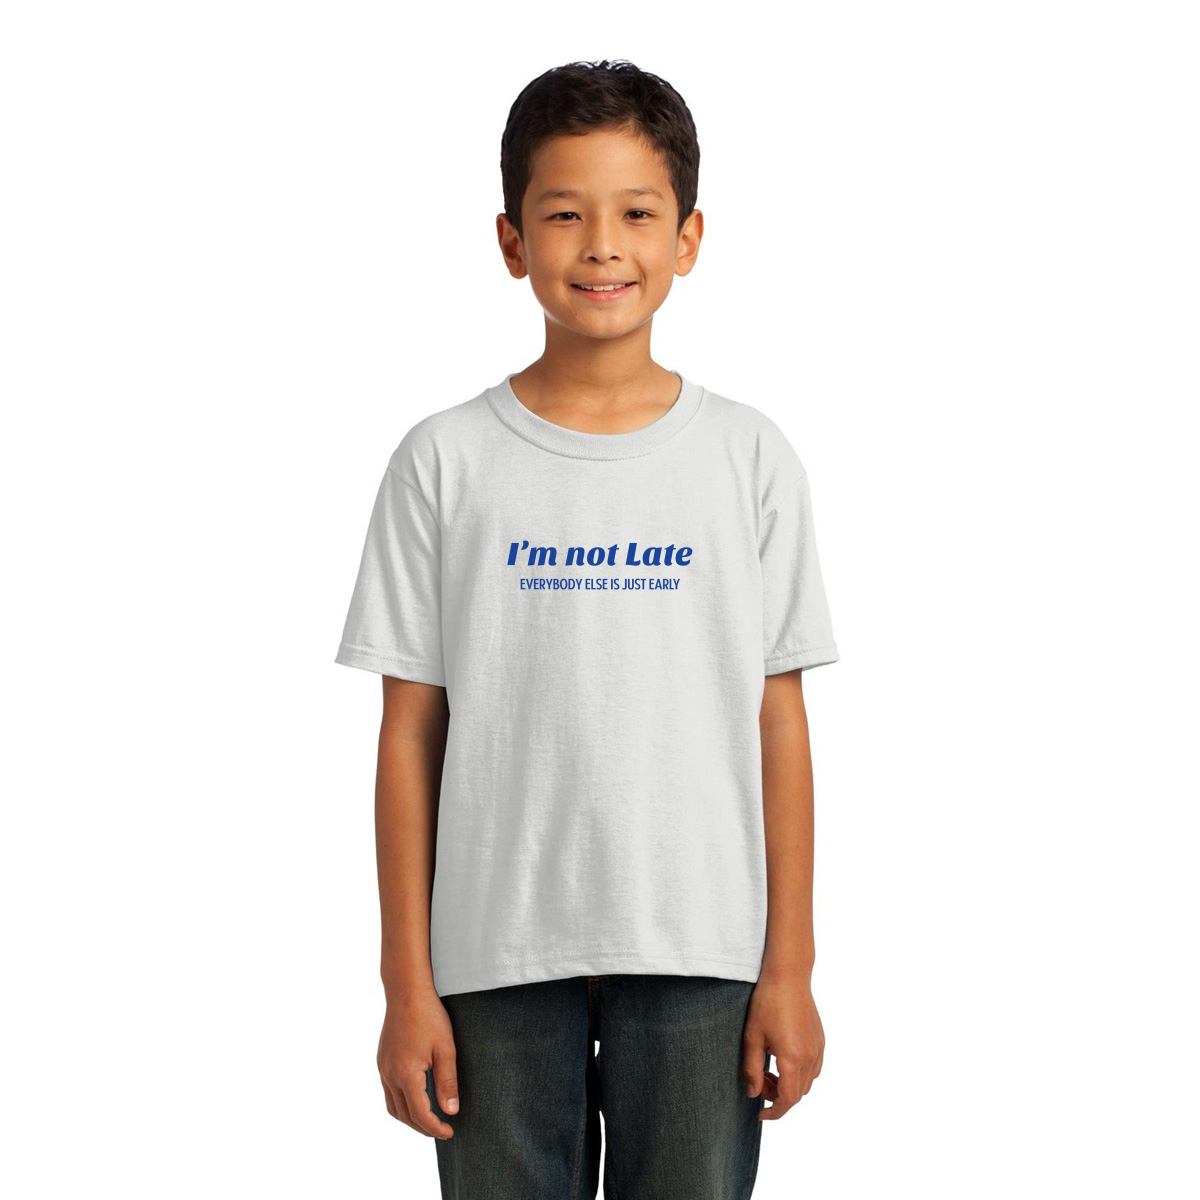 I’m not late everybody else is just early Kids T-shirt | White